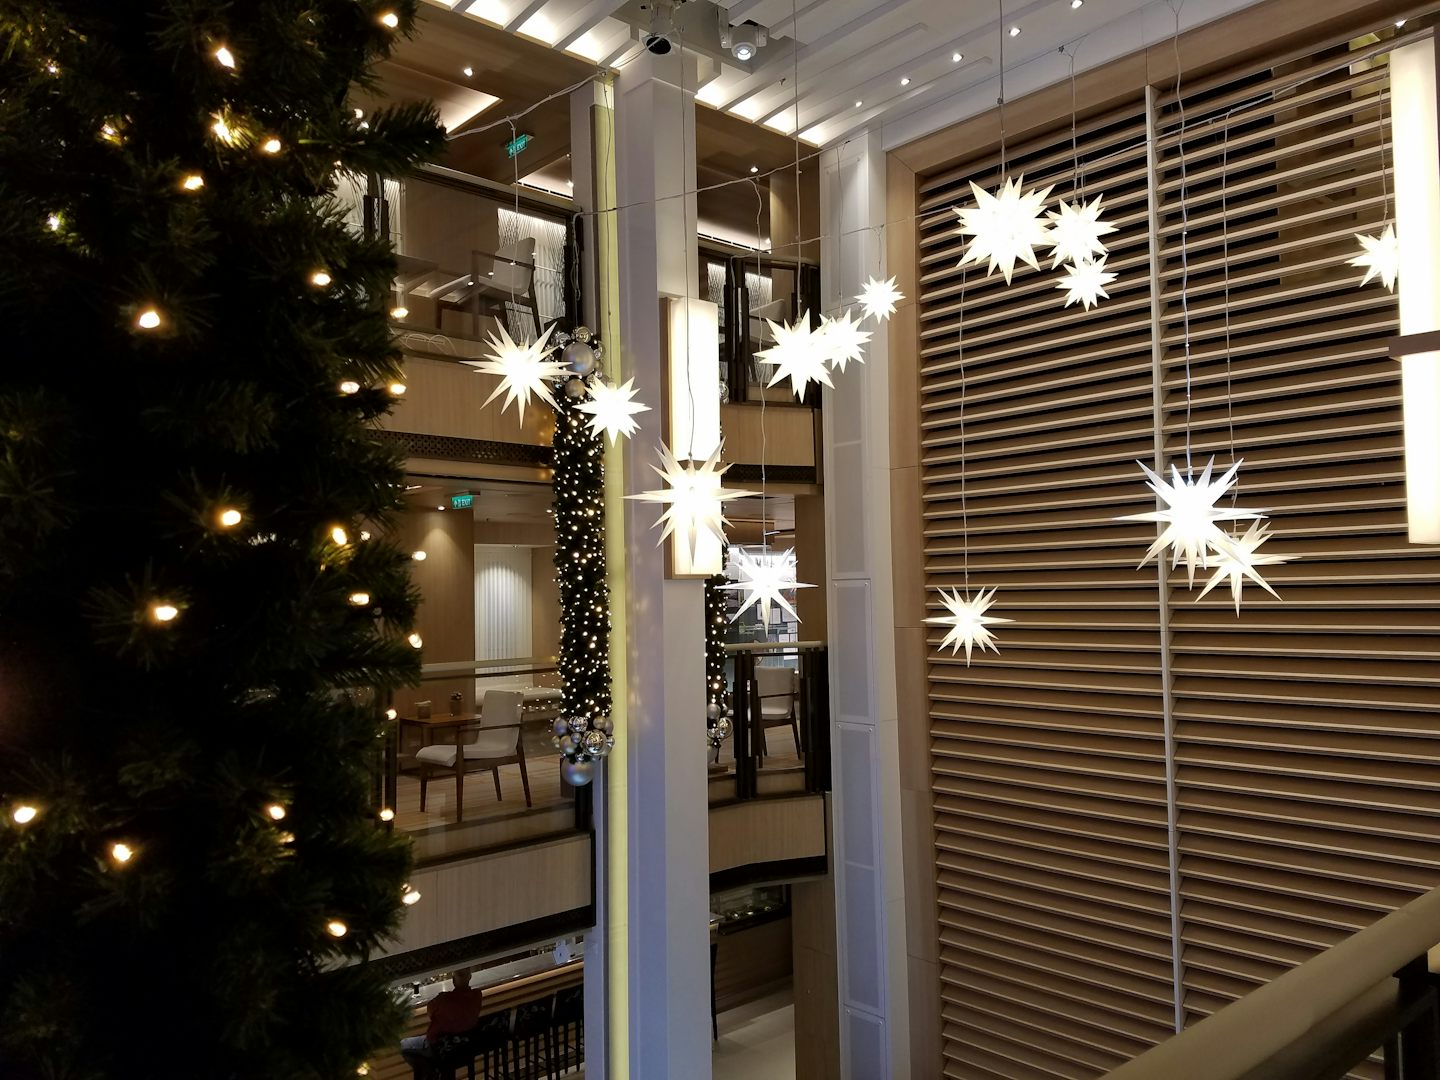 Lovely understated Christmas decorations in the atrium